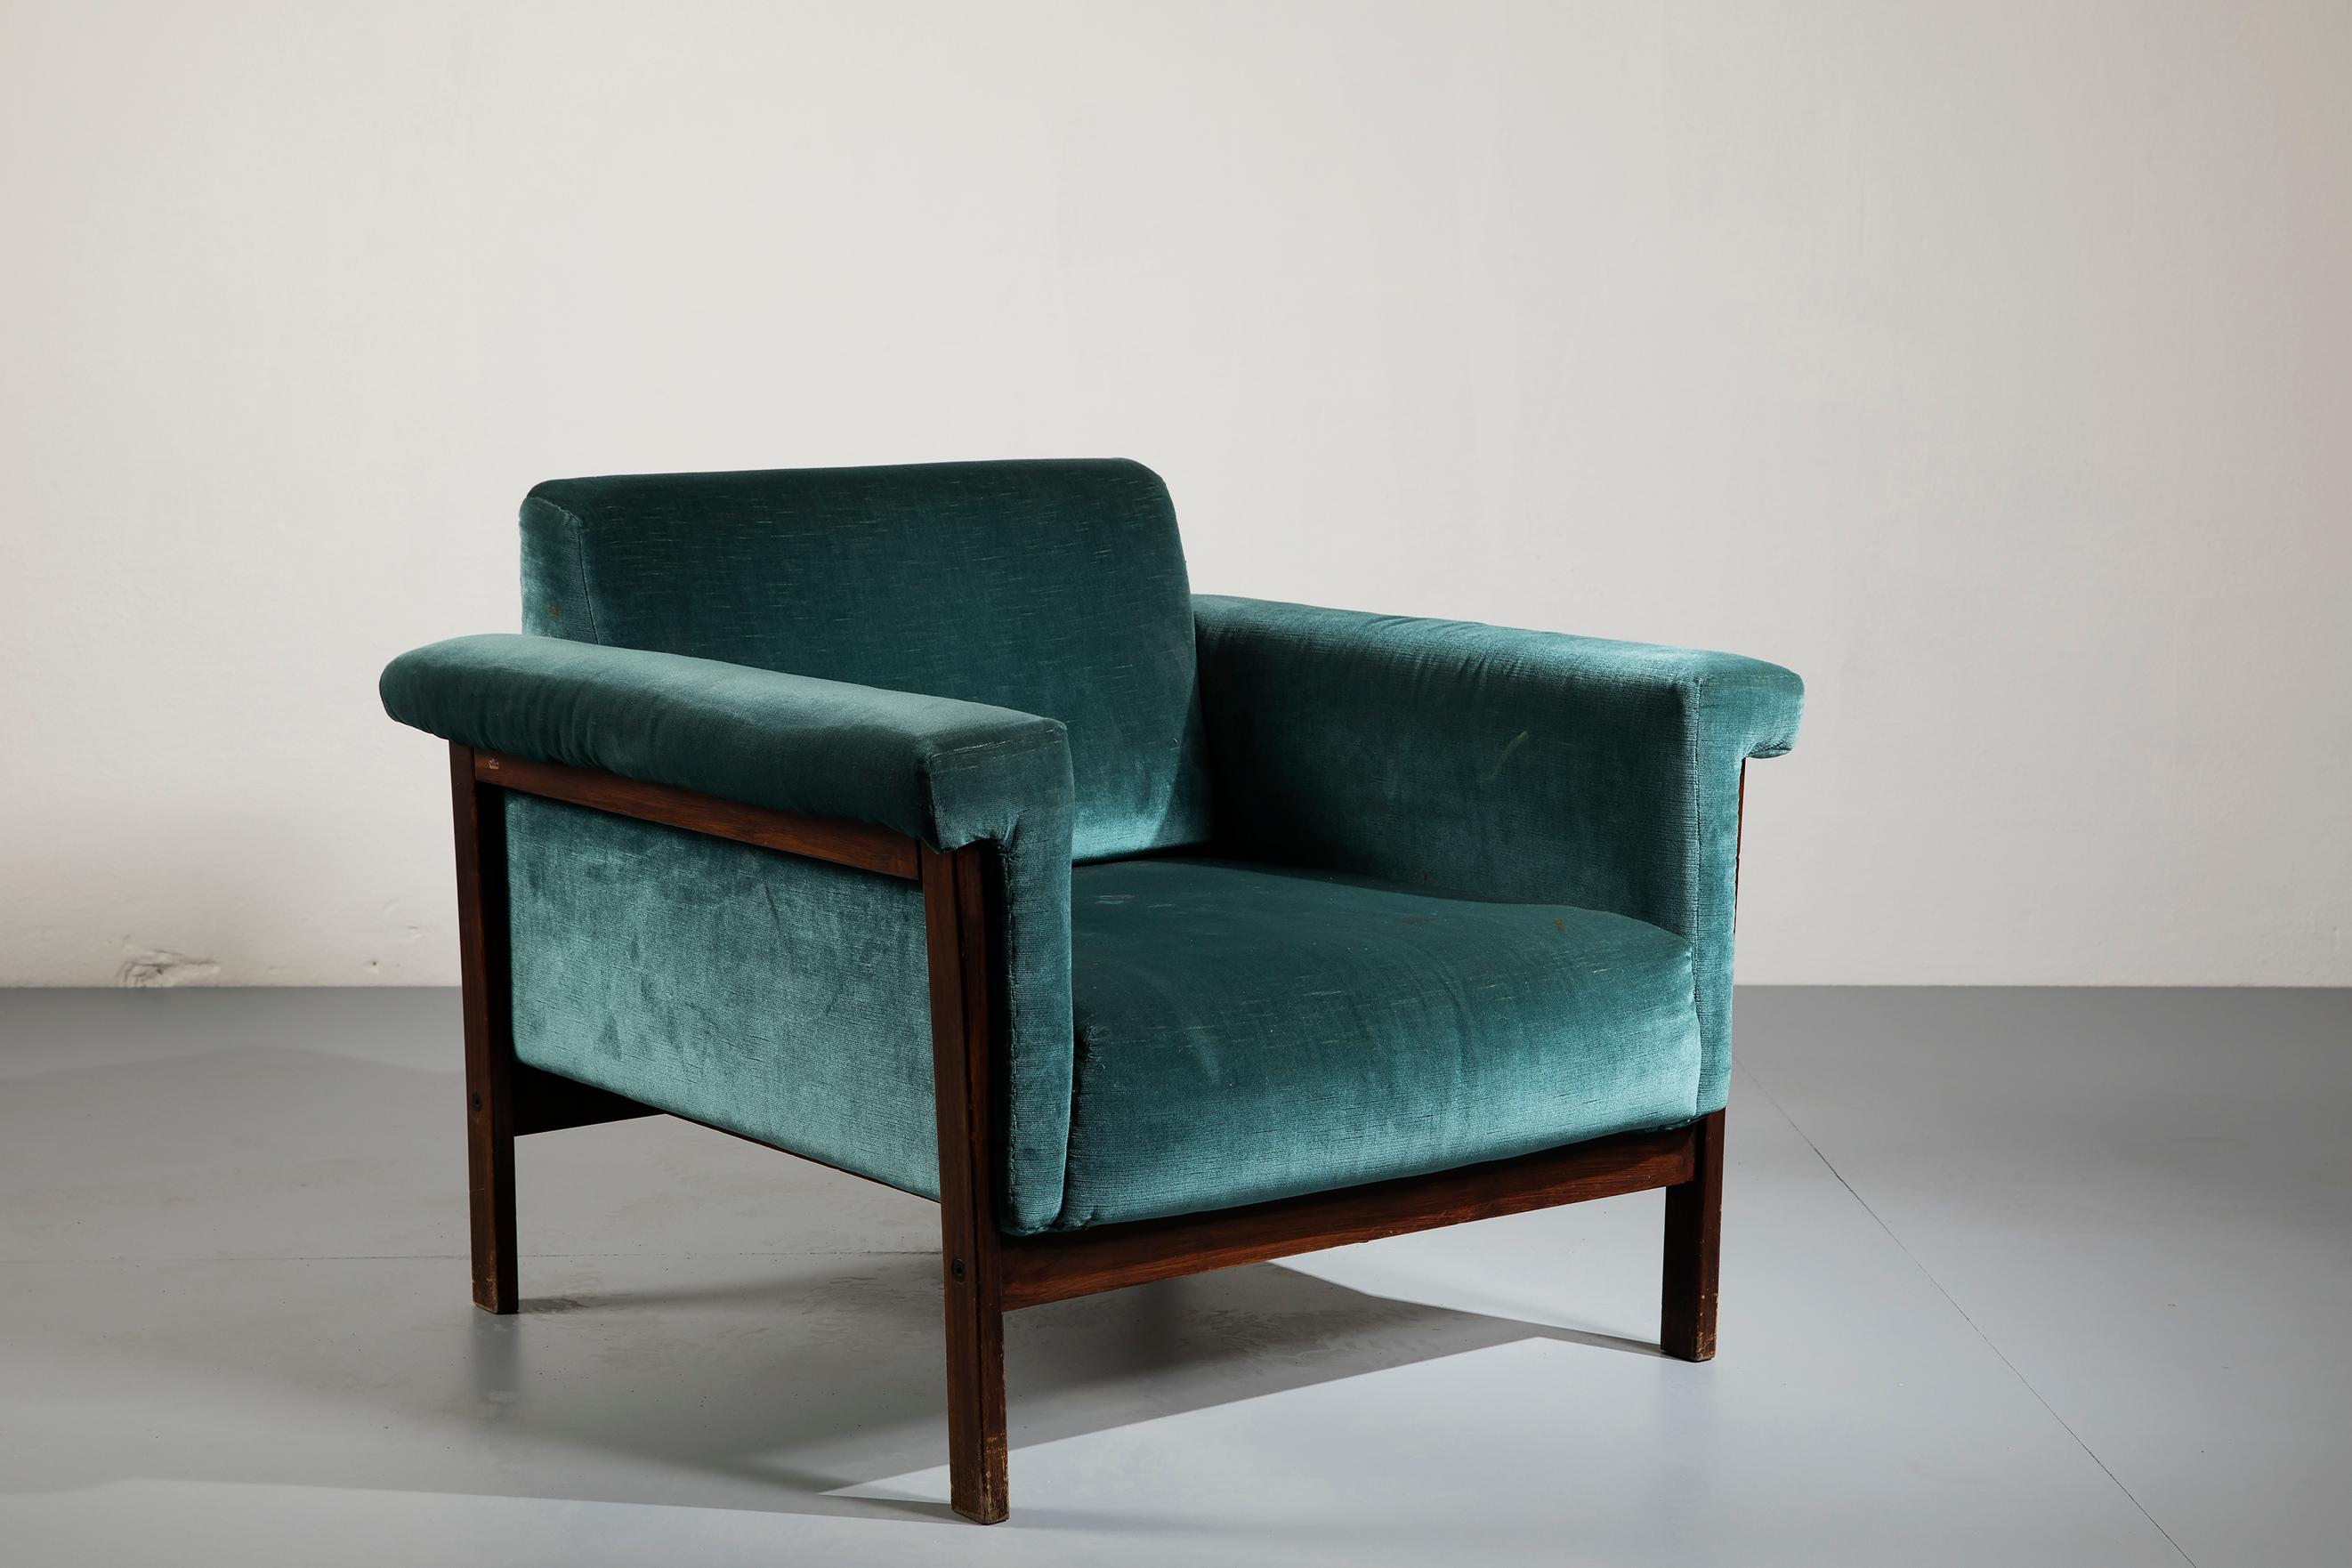 Rare 'Canada' armchair designed by Ettore Sottsass for Poltronova in late 1950s. This one was probably produced around 1958.
The very beautiful teal blue fabric is the original one and it is in good conditions: no scratches and just some little